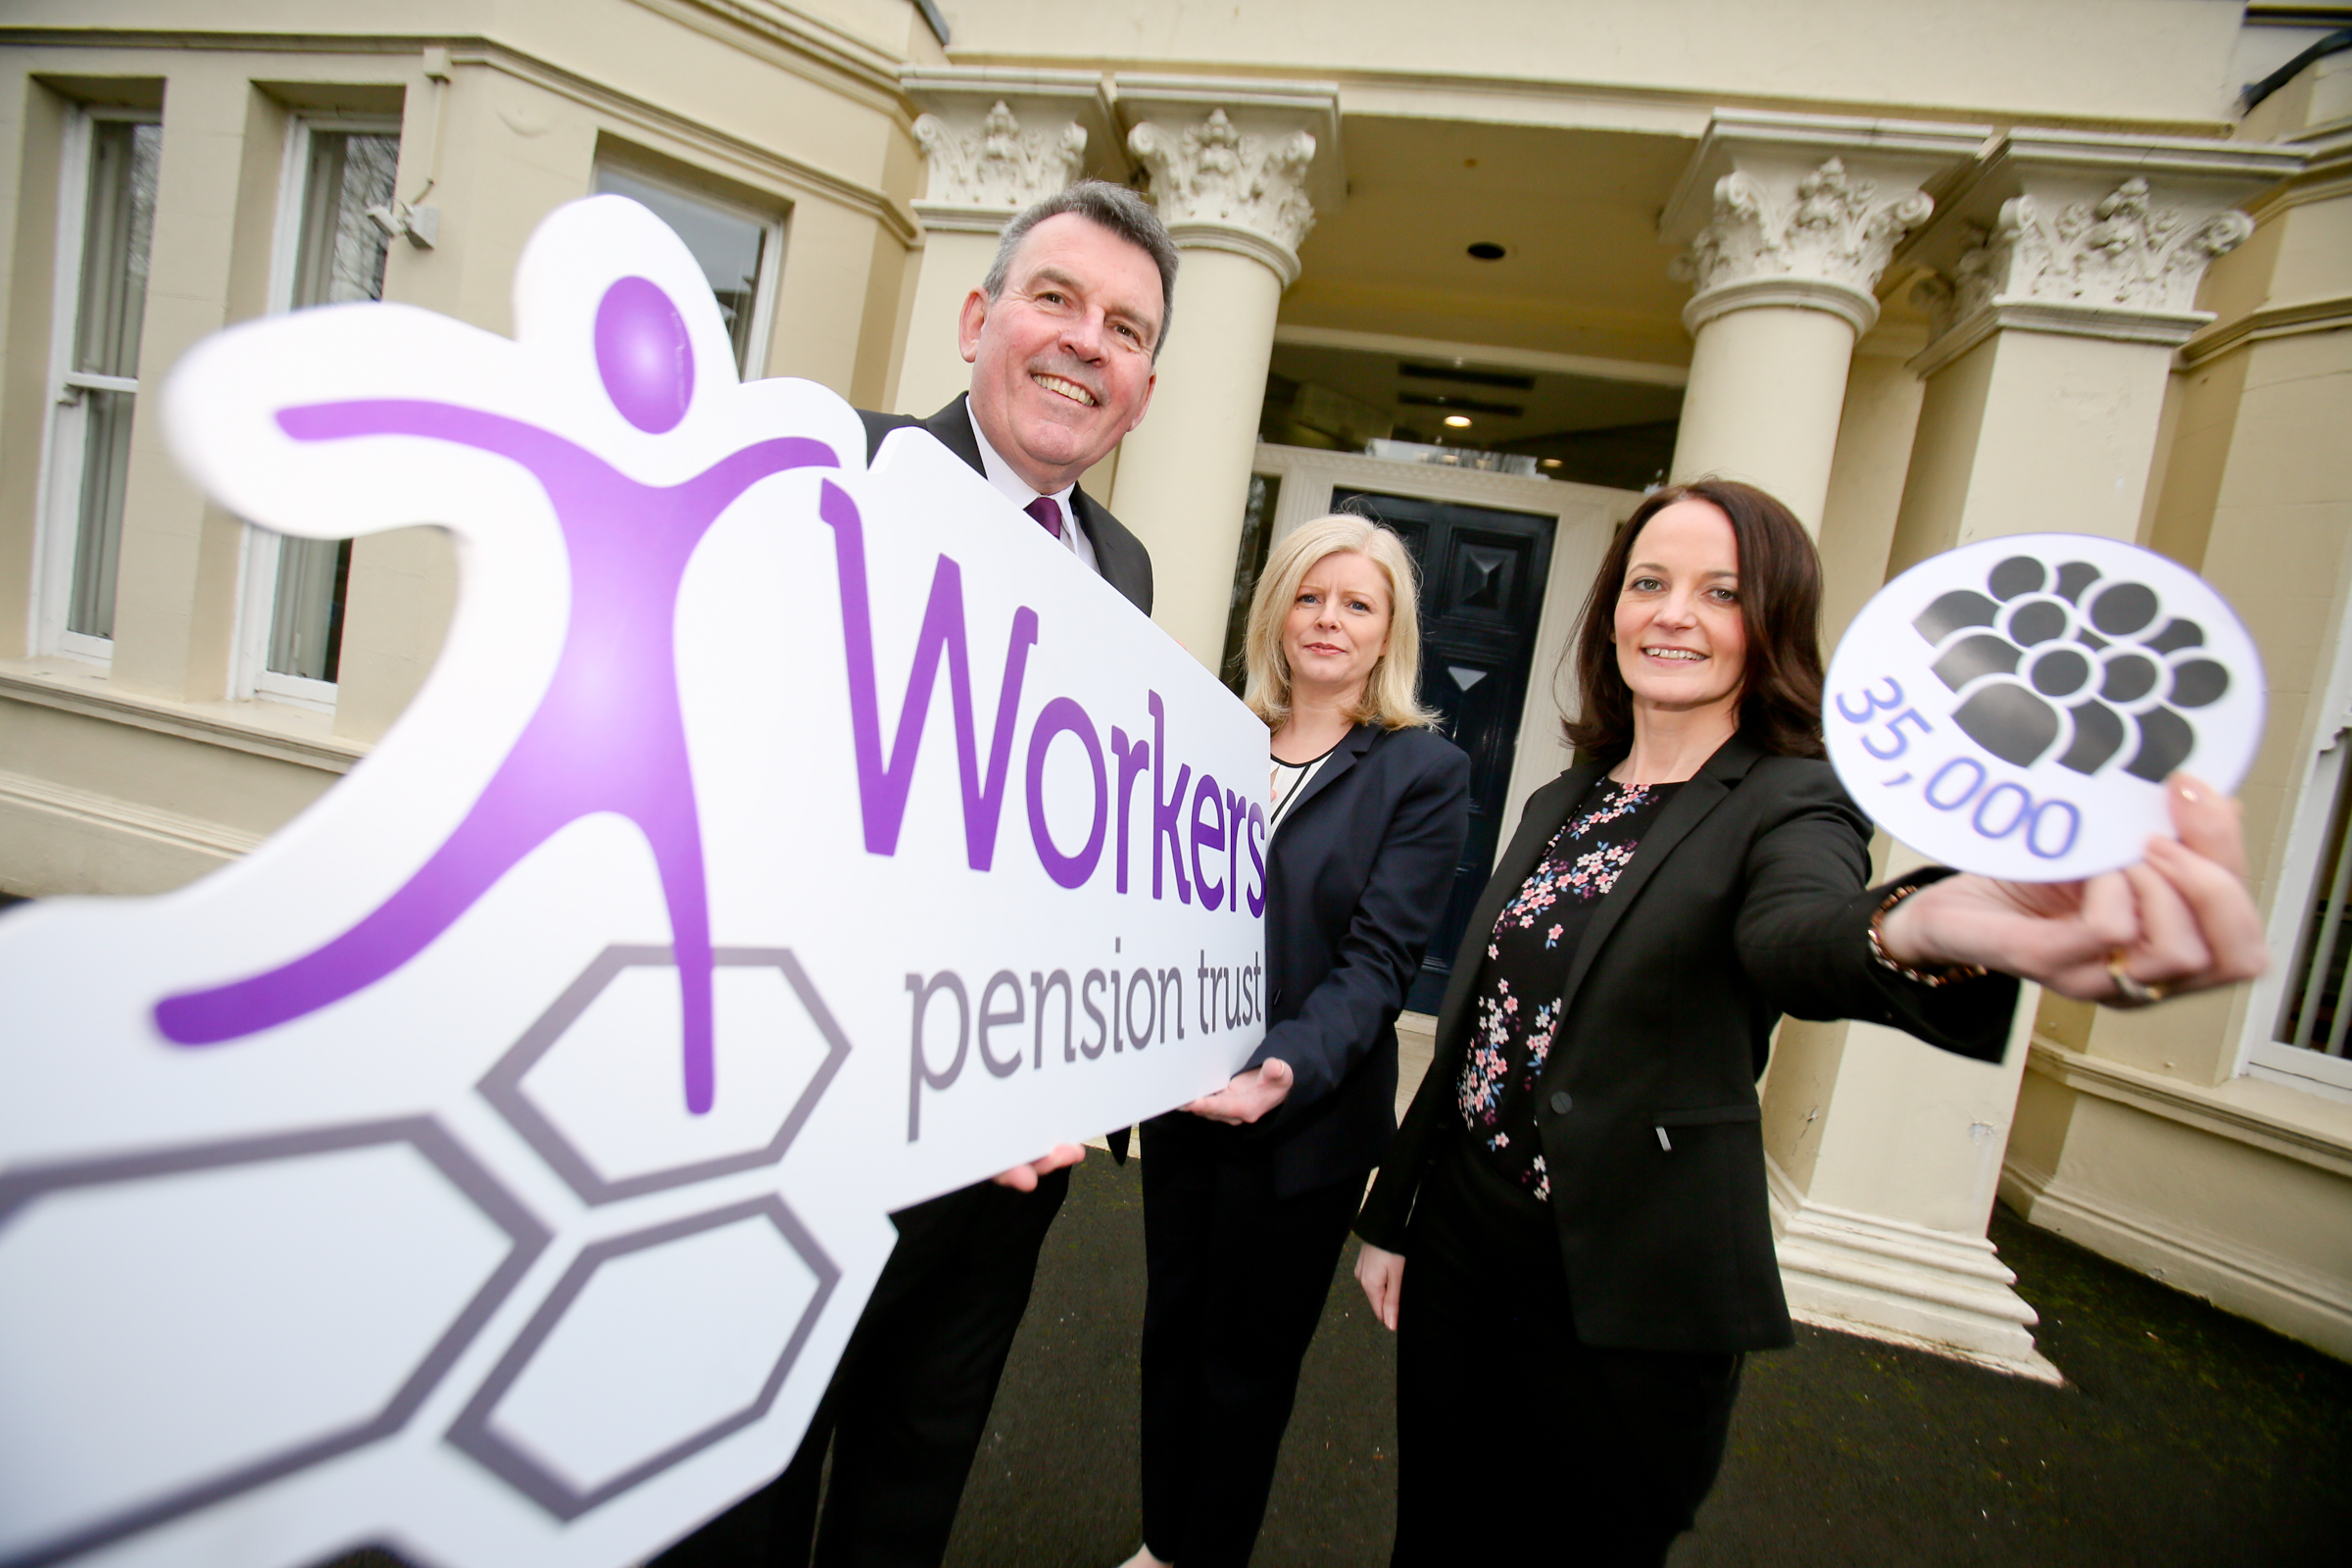 In safe hands: The pensions of more than 35,000 people are now in the safe hands of Workers Pension Trust, the largest locally based auto-enrolment provider that is open to all businesses across the UK.